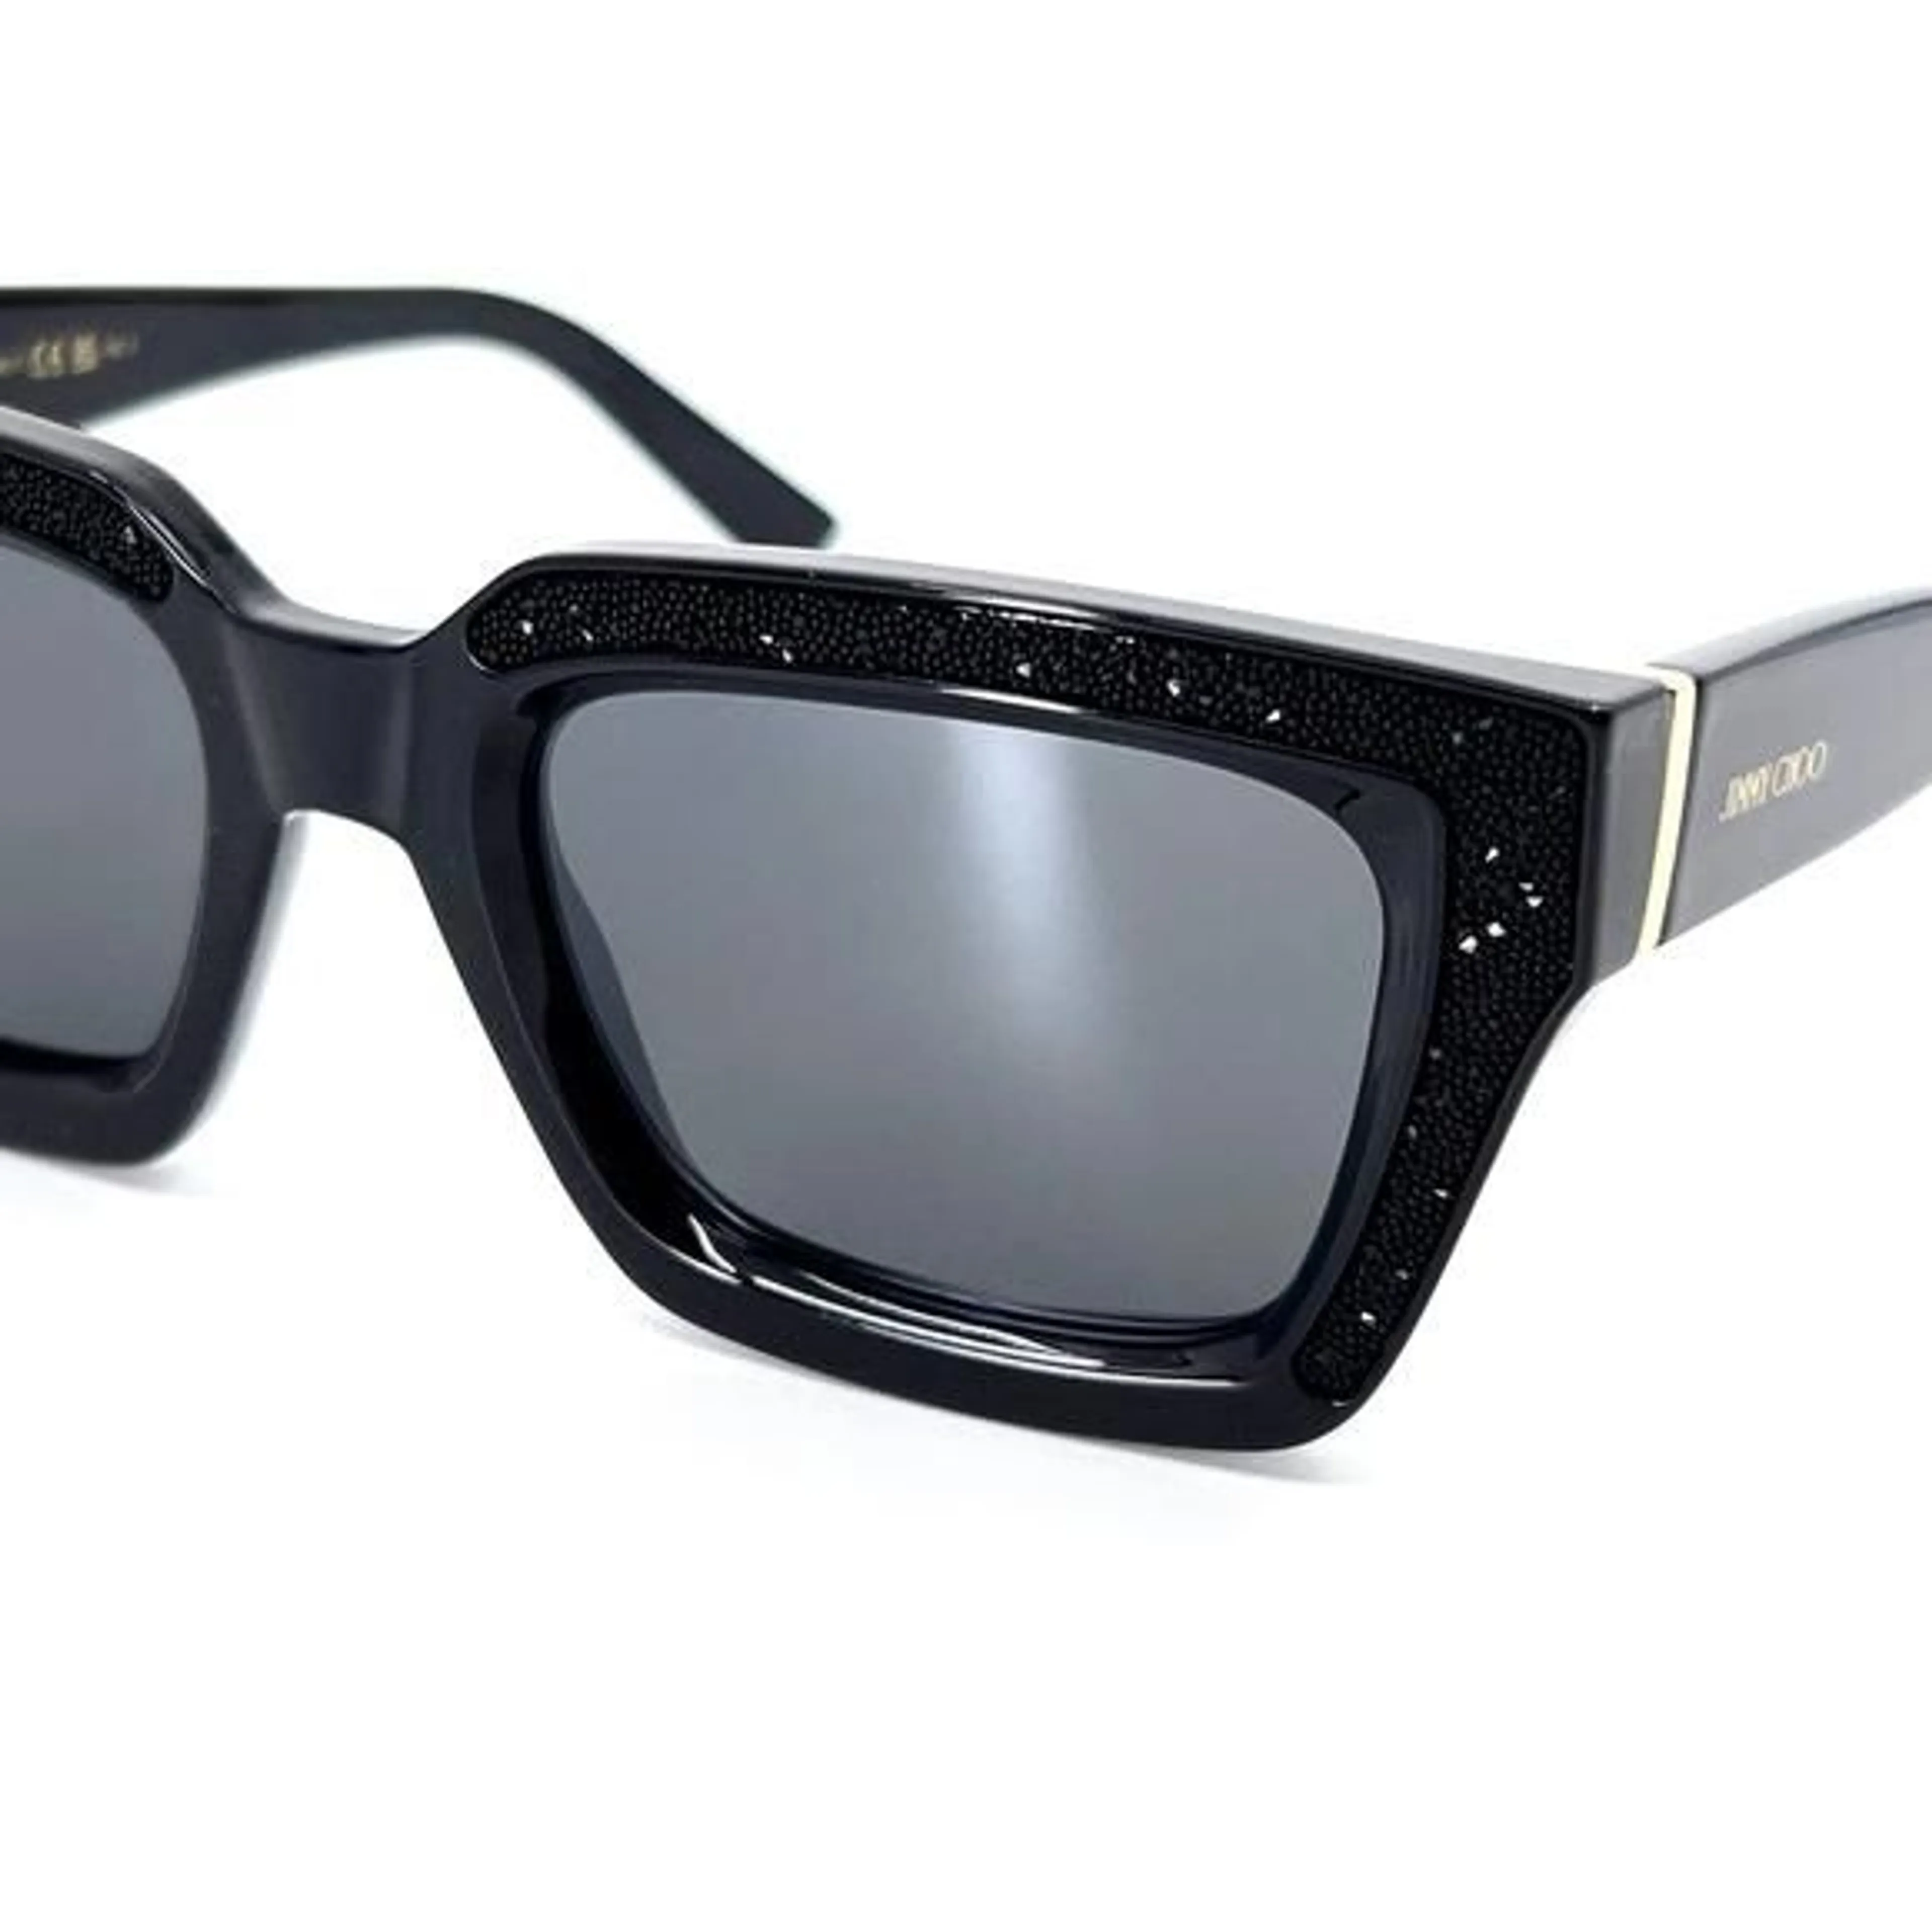 JIMMY CHOO Sunglasses MEGS/S 807T4 Authentic New! · Whatnot: Buy 